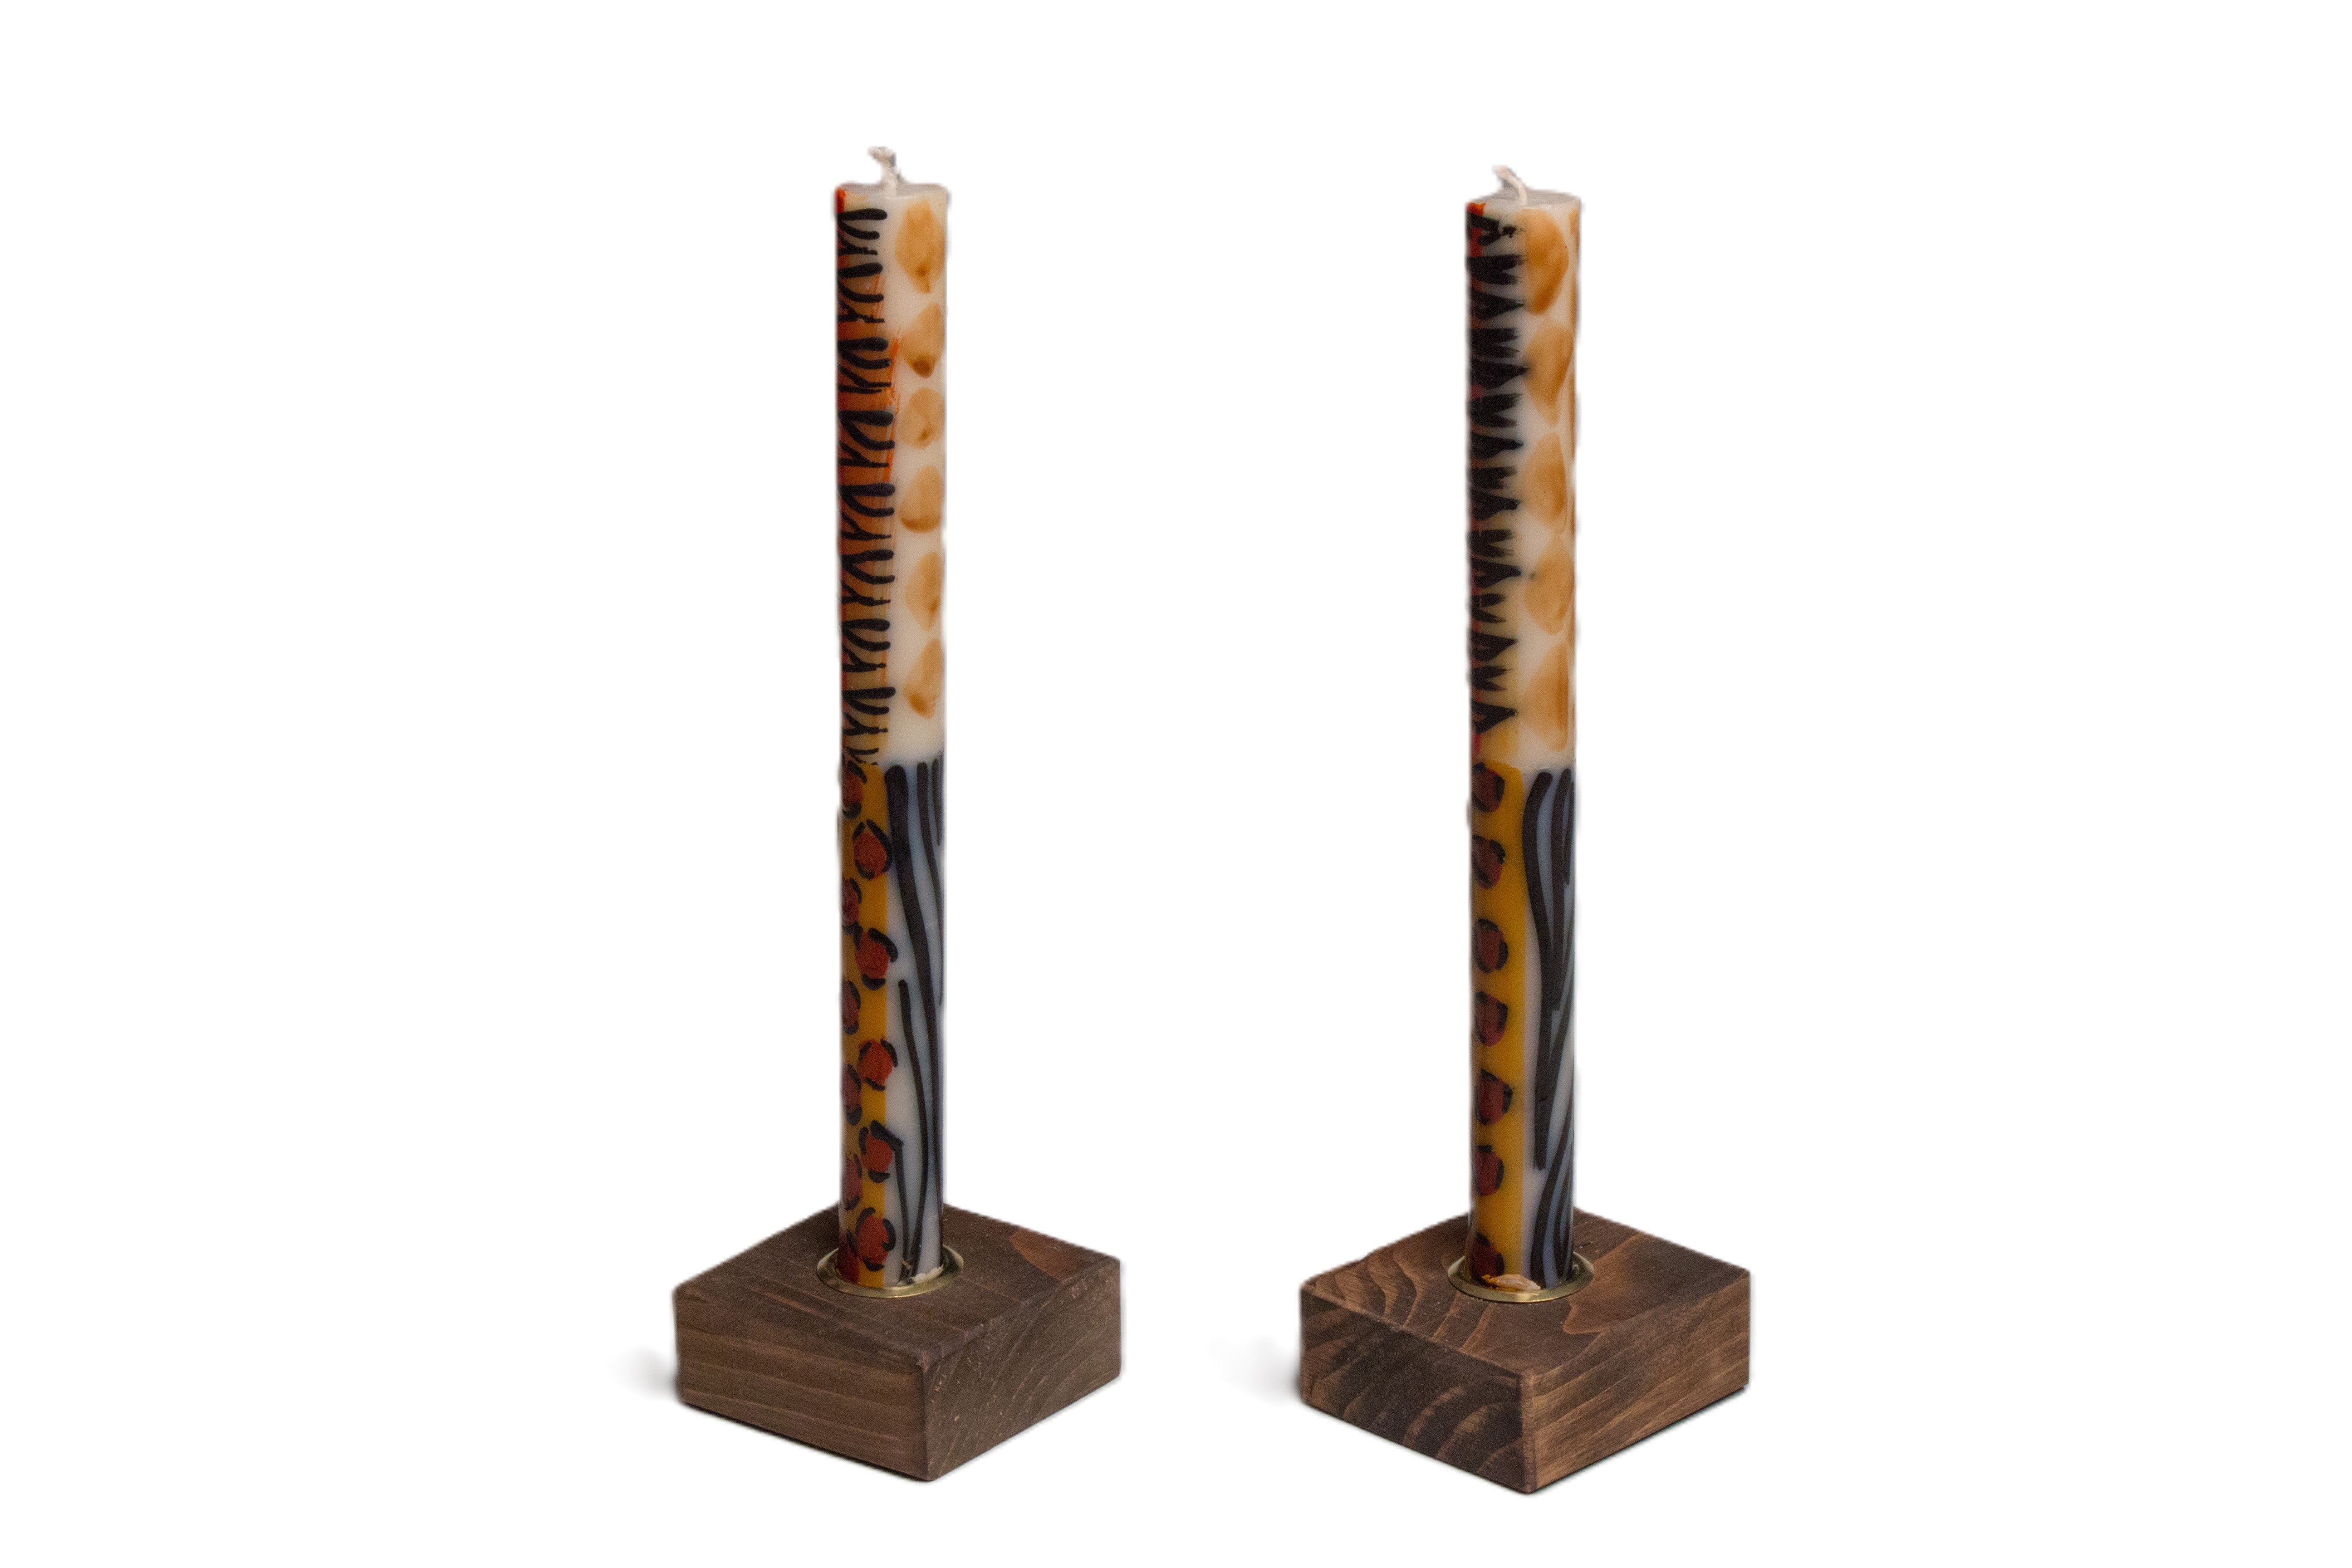 Dark color wooden taper candle holders holding a pair of Animal Print taper candles!